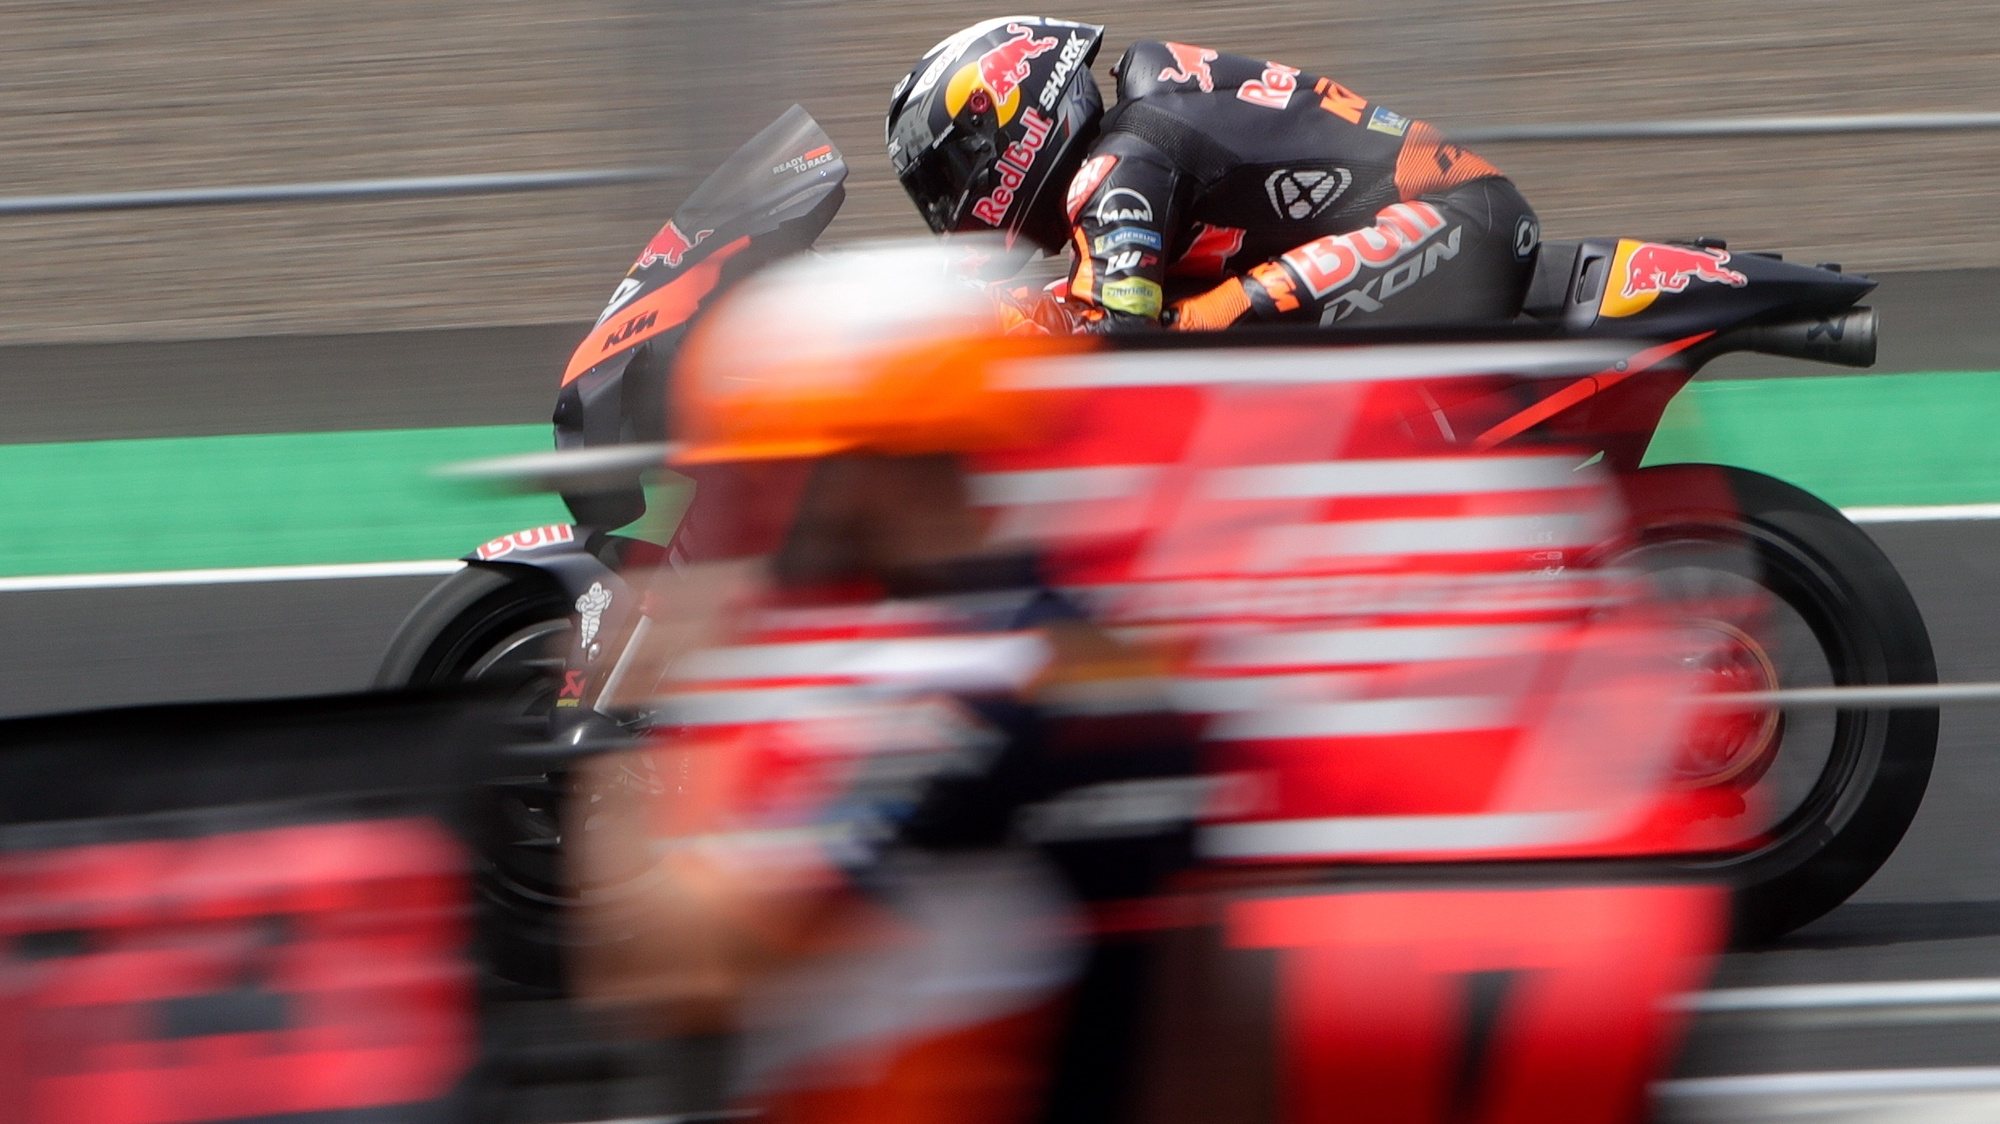 epa09837297 Portuguese MotoGP rider Miguel Oliveira  of the Red Bull KTM Factory Racing Team in action during a warm up session of the Motorcycling Grand Prix of Indonesia at the Pertamina Mandalika International street circuit in Lombok, Indonesia, 20 March 2022  EPA/ADI WEDA